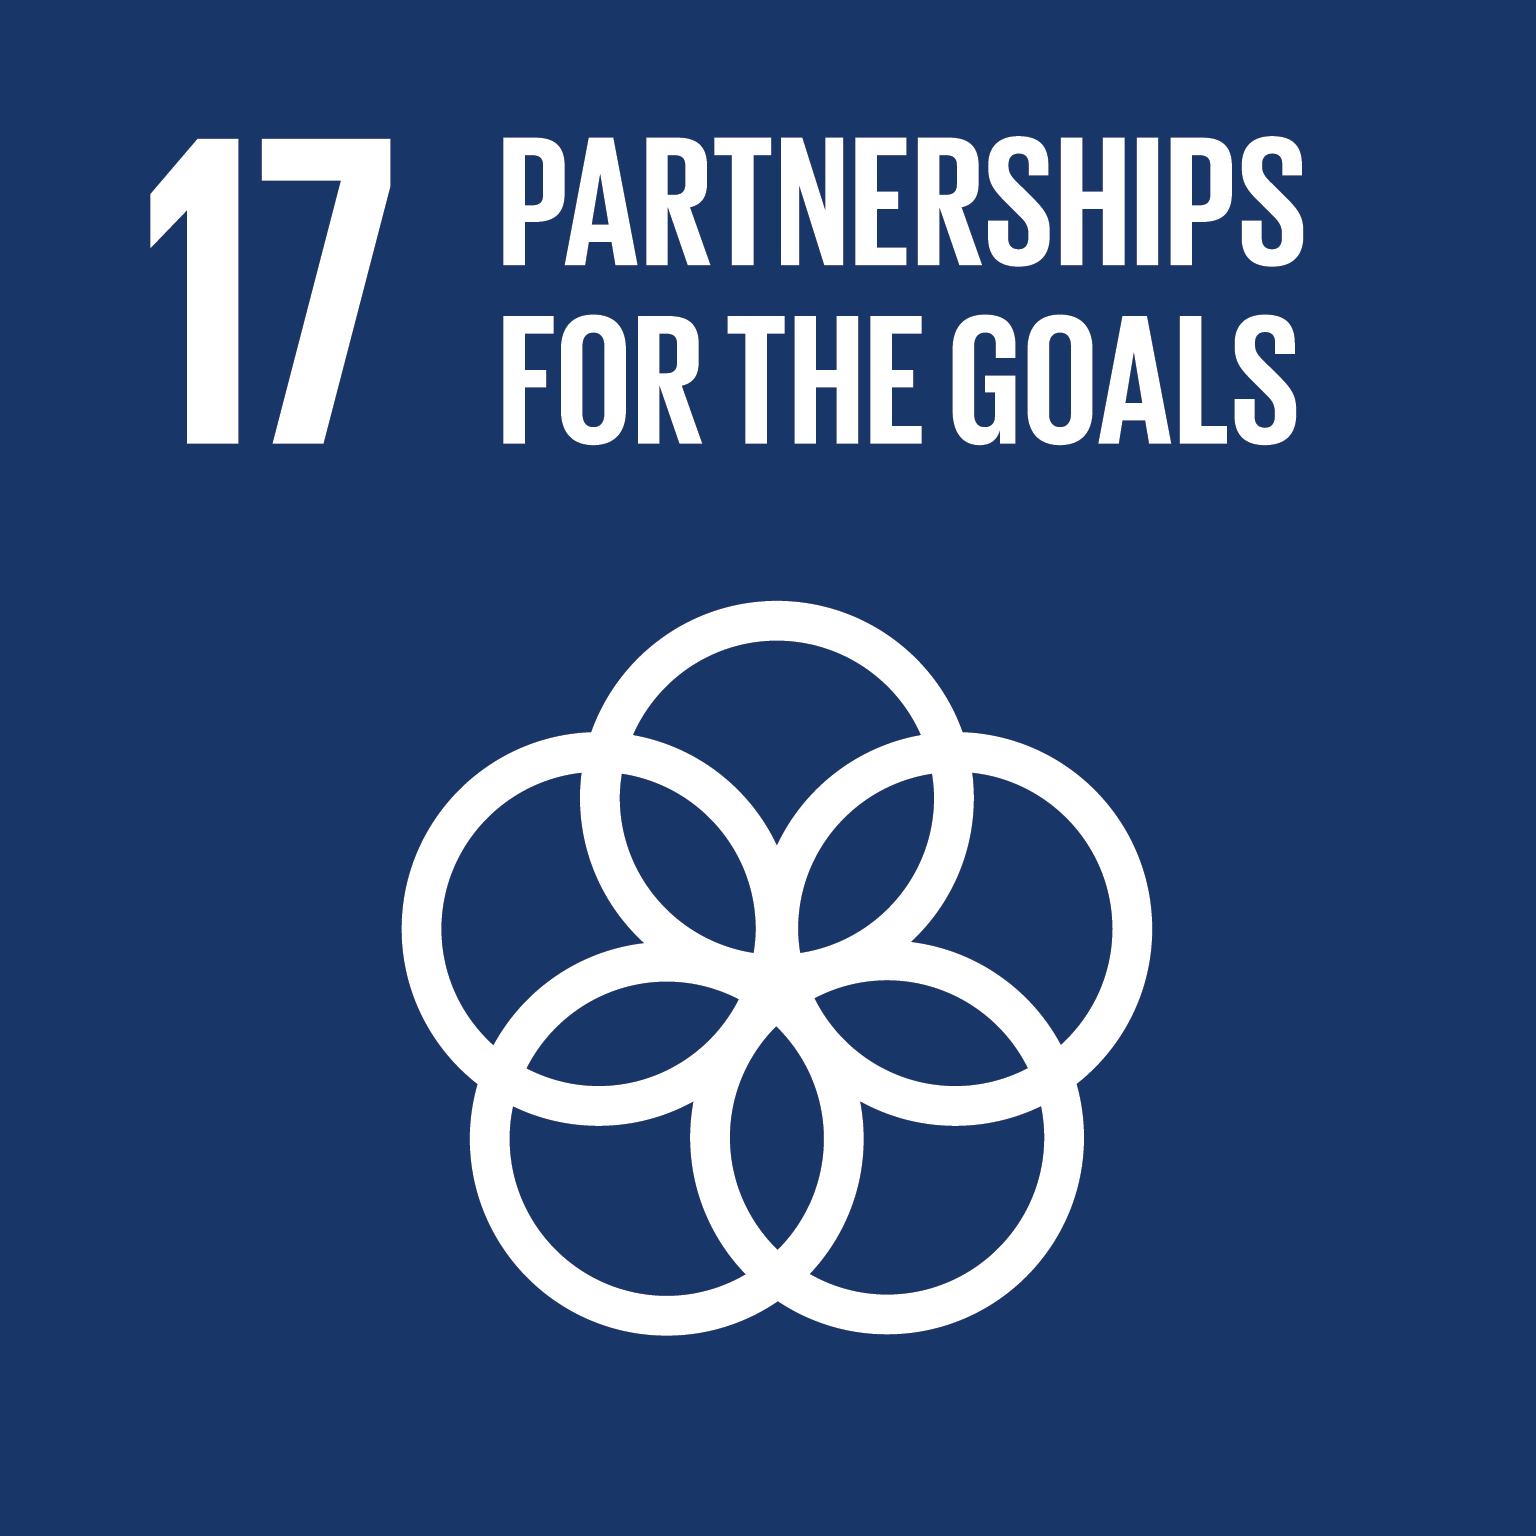 sustainable development goal 17 icon partnerships for the goals